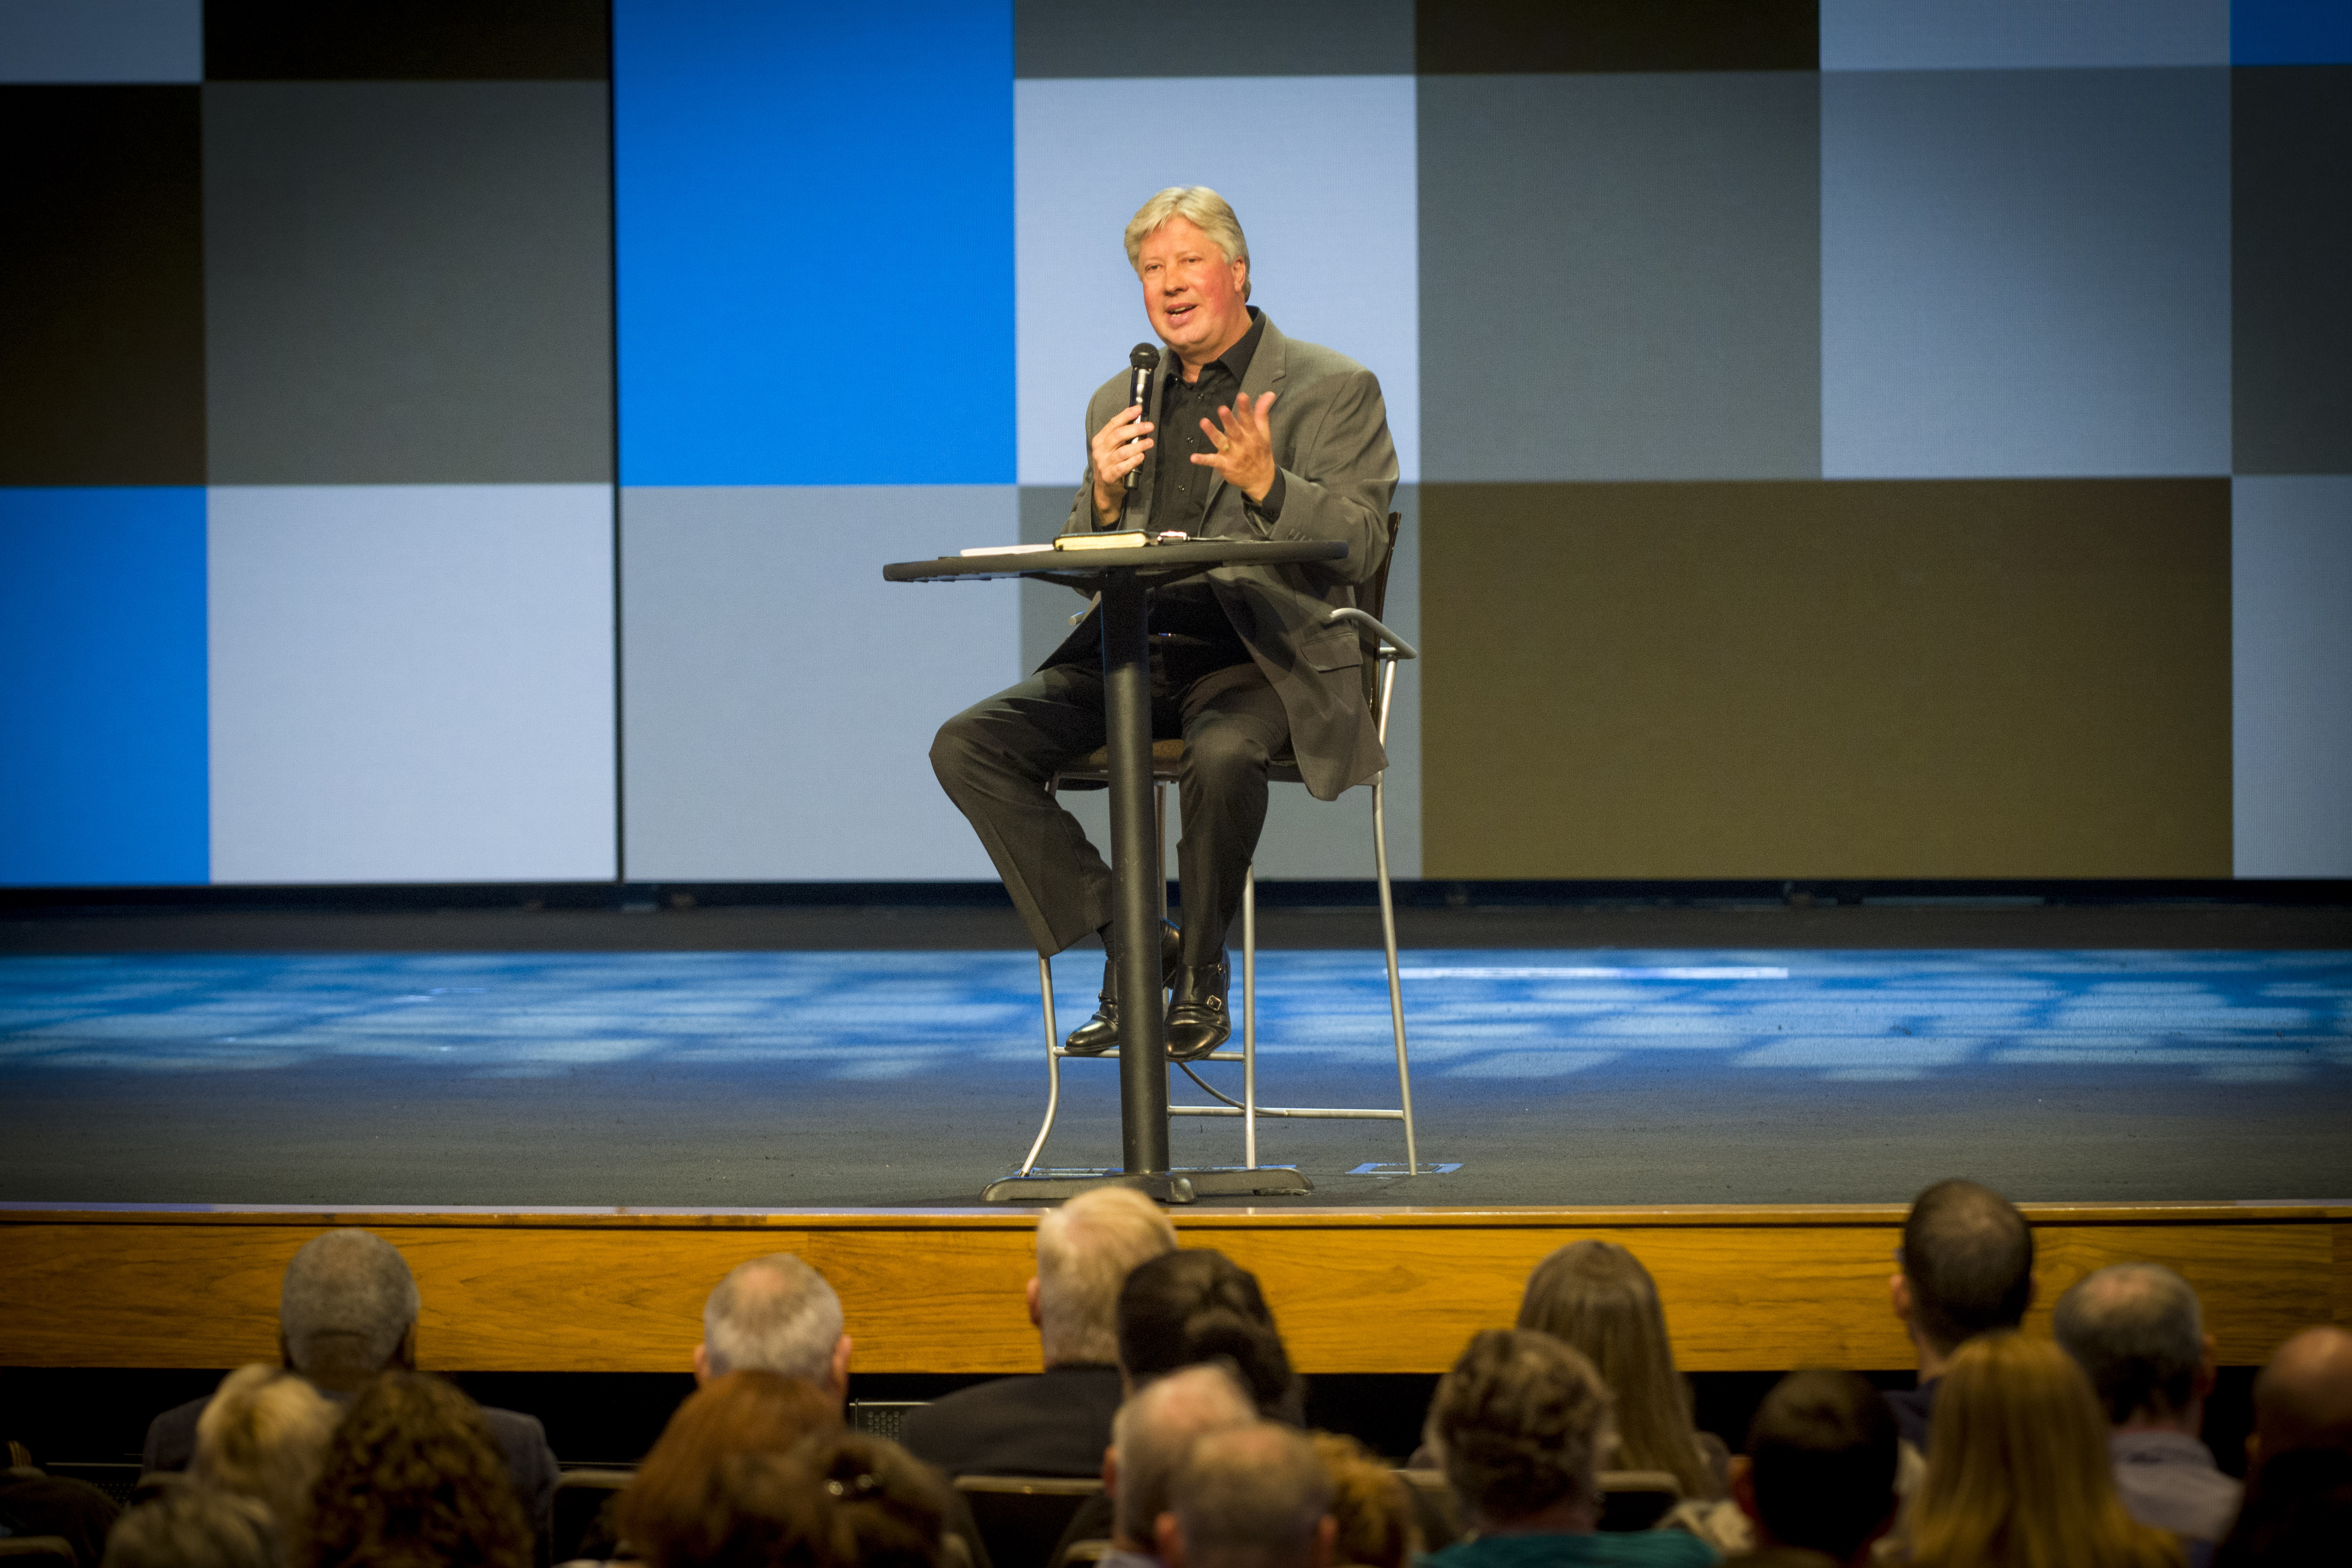 Robert Morris, the senior pastor of Gateway Church in Southlake, one of the largest churches...